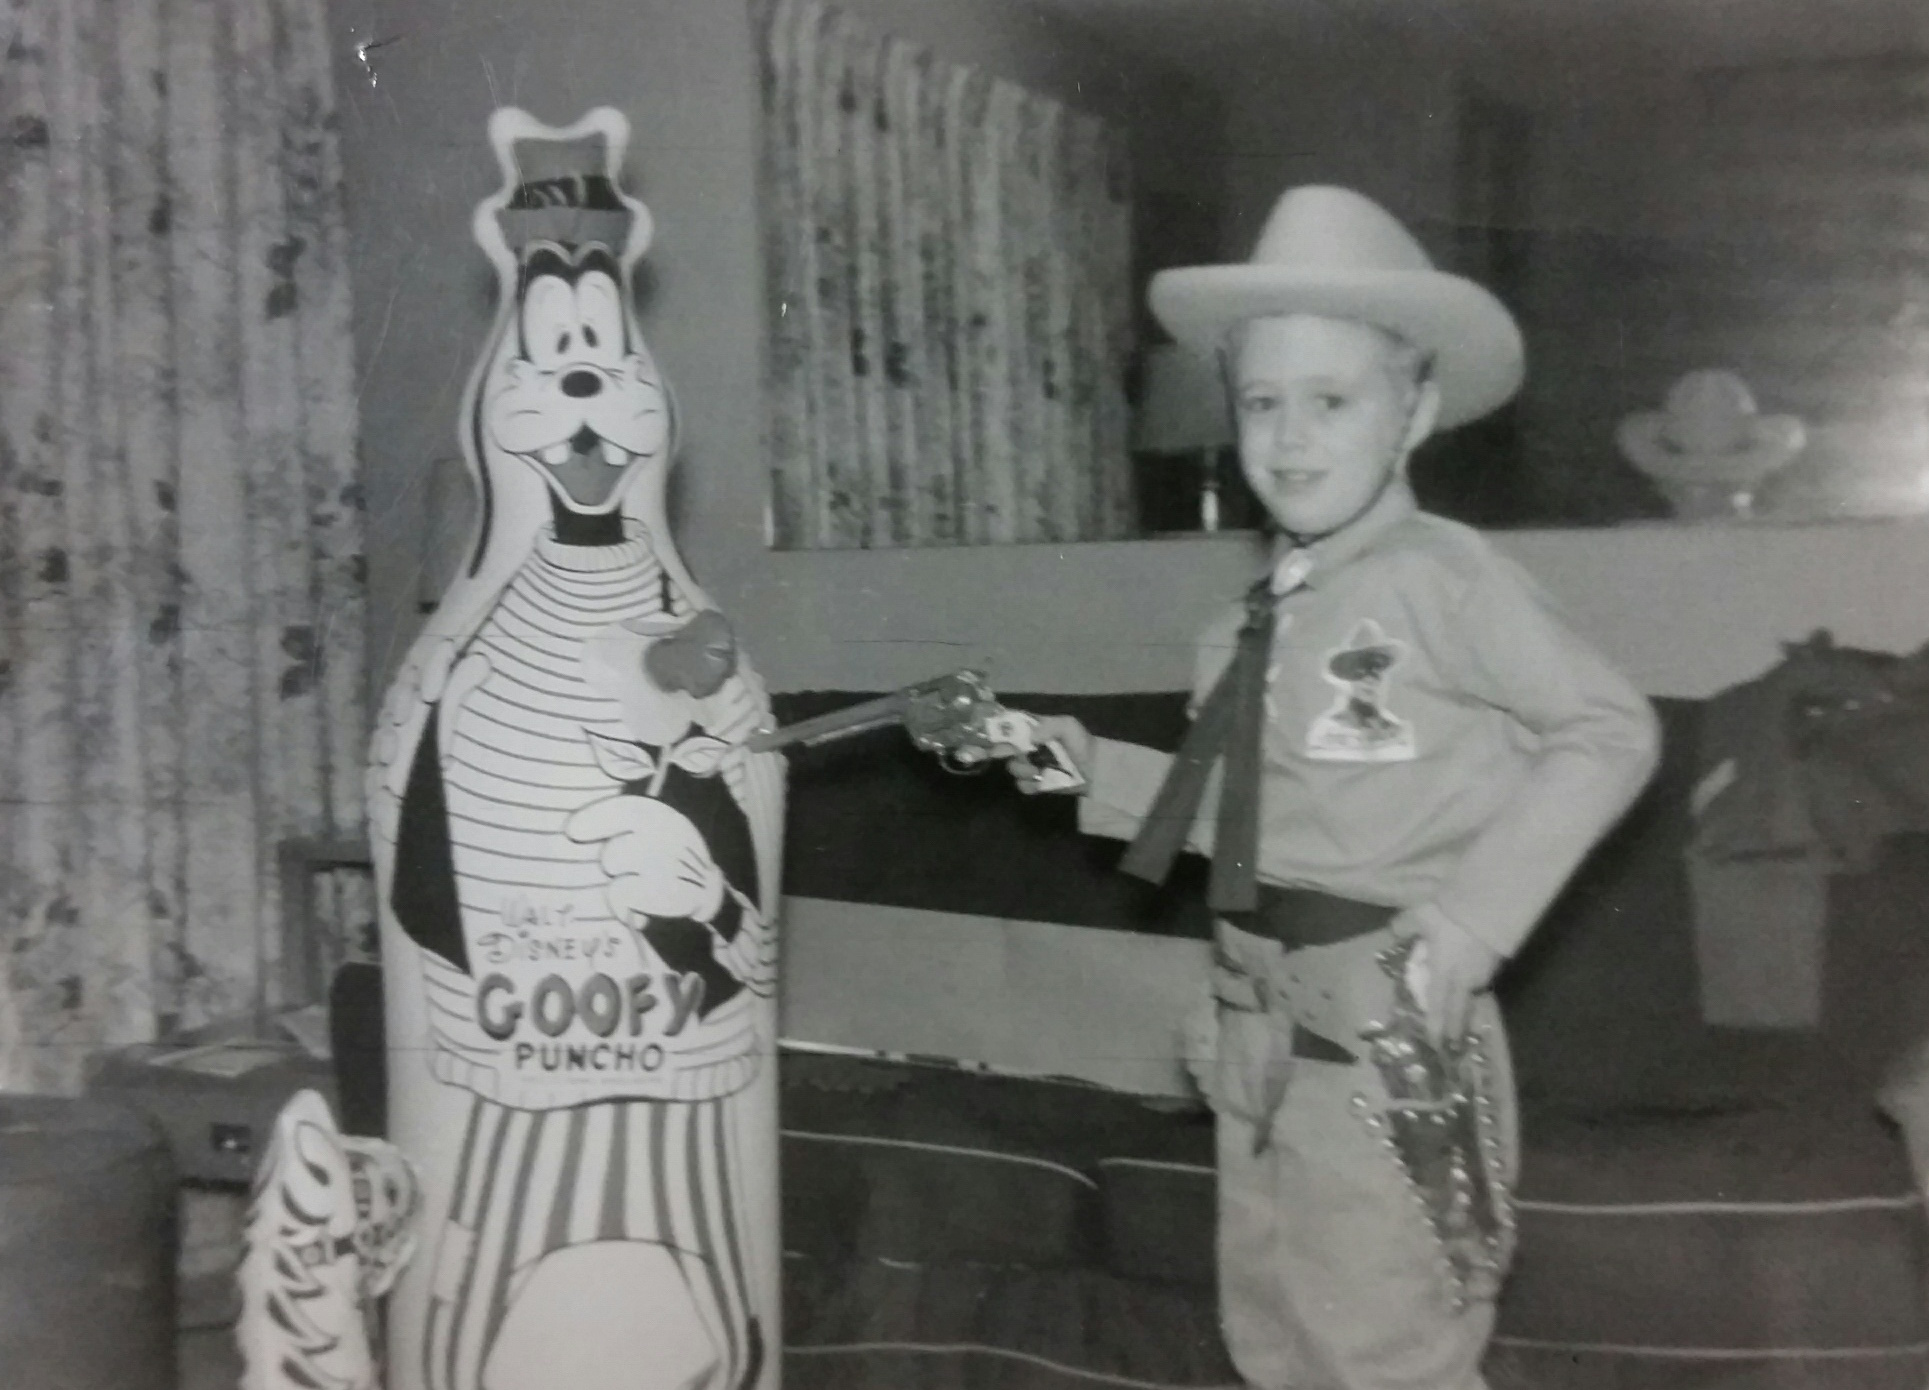 A young Terry Simonson, dressed as a sheriff, takes aim at Goofy in his home in Gary, Ind. Courtesty